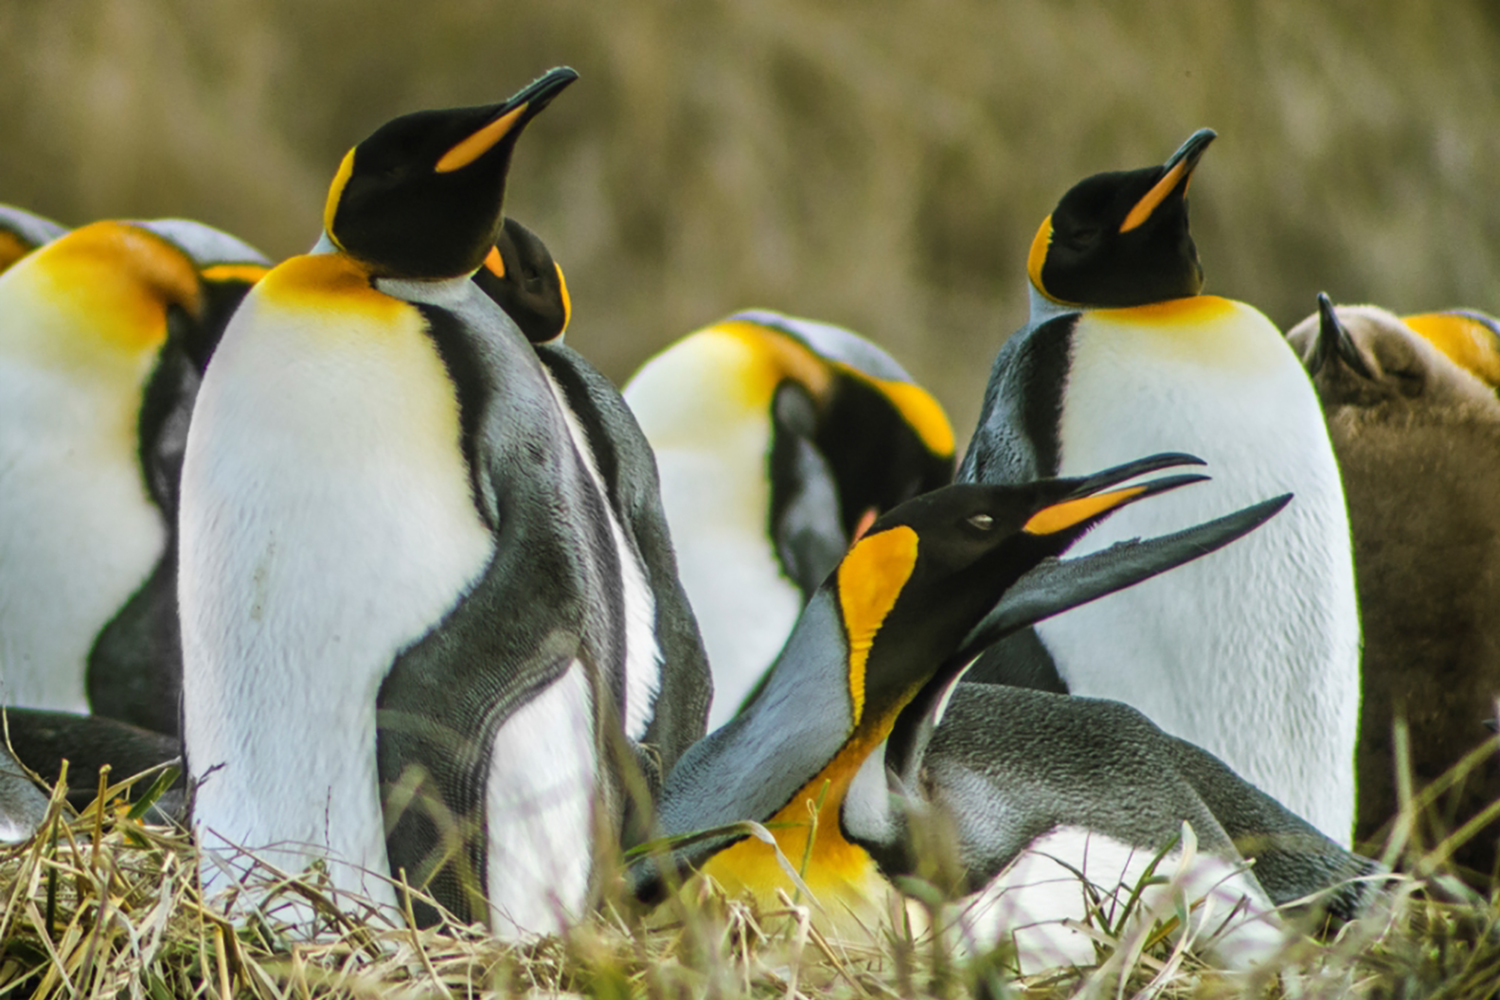 Where to See Penguins in Chile